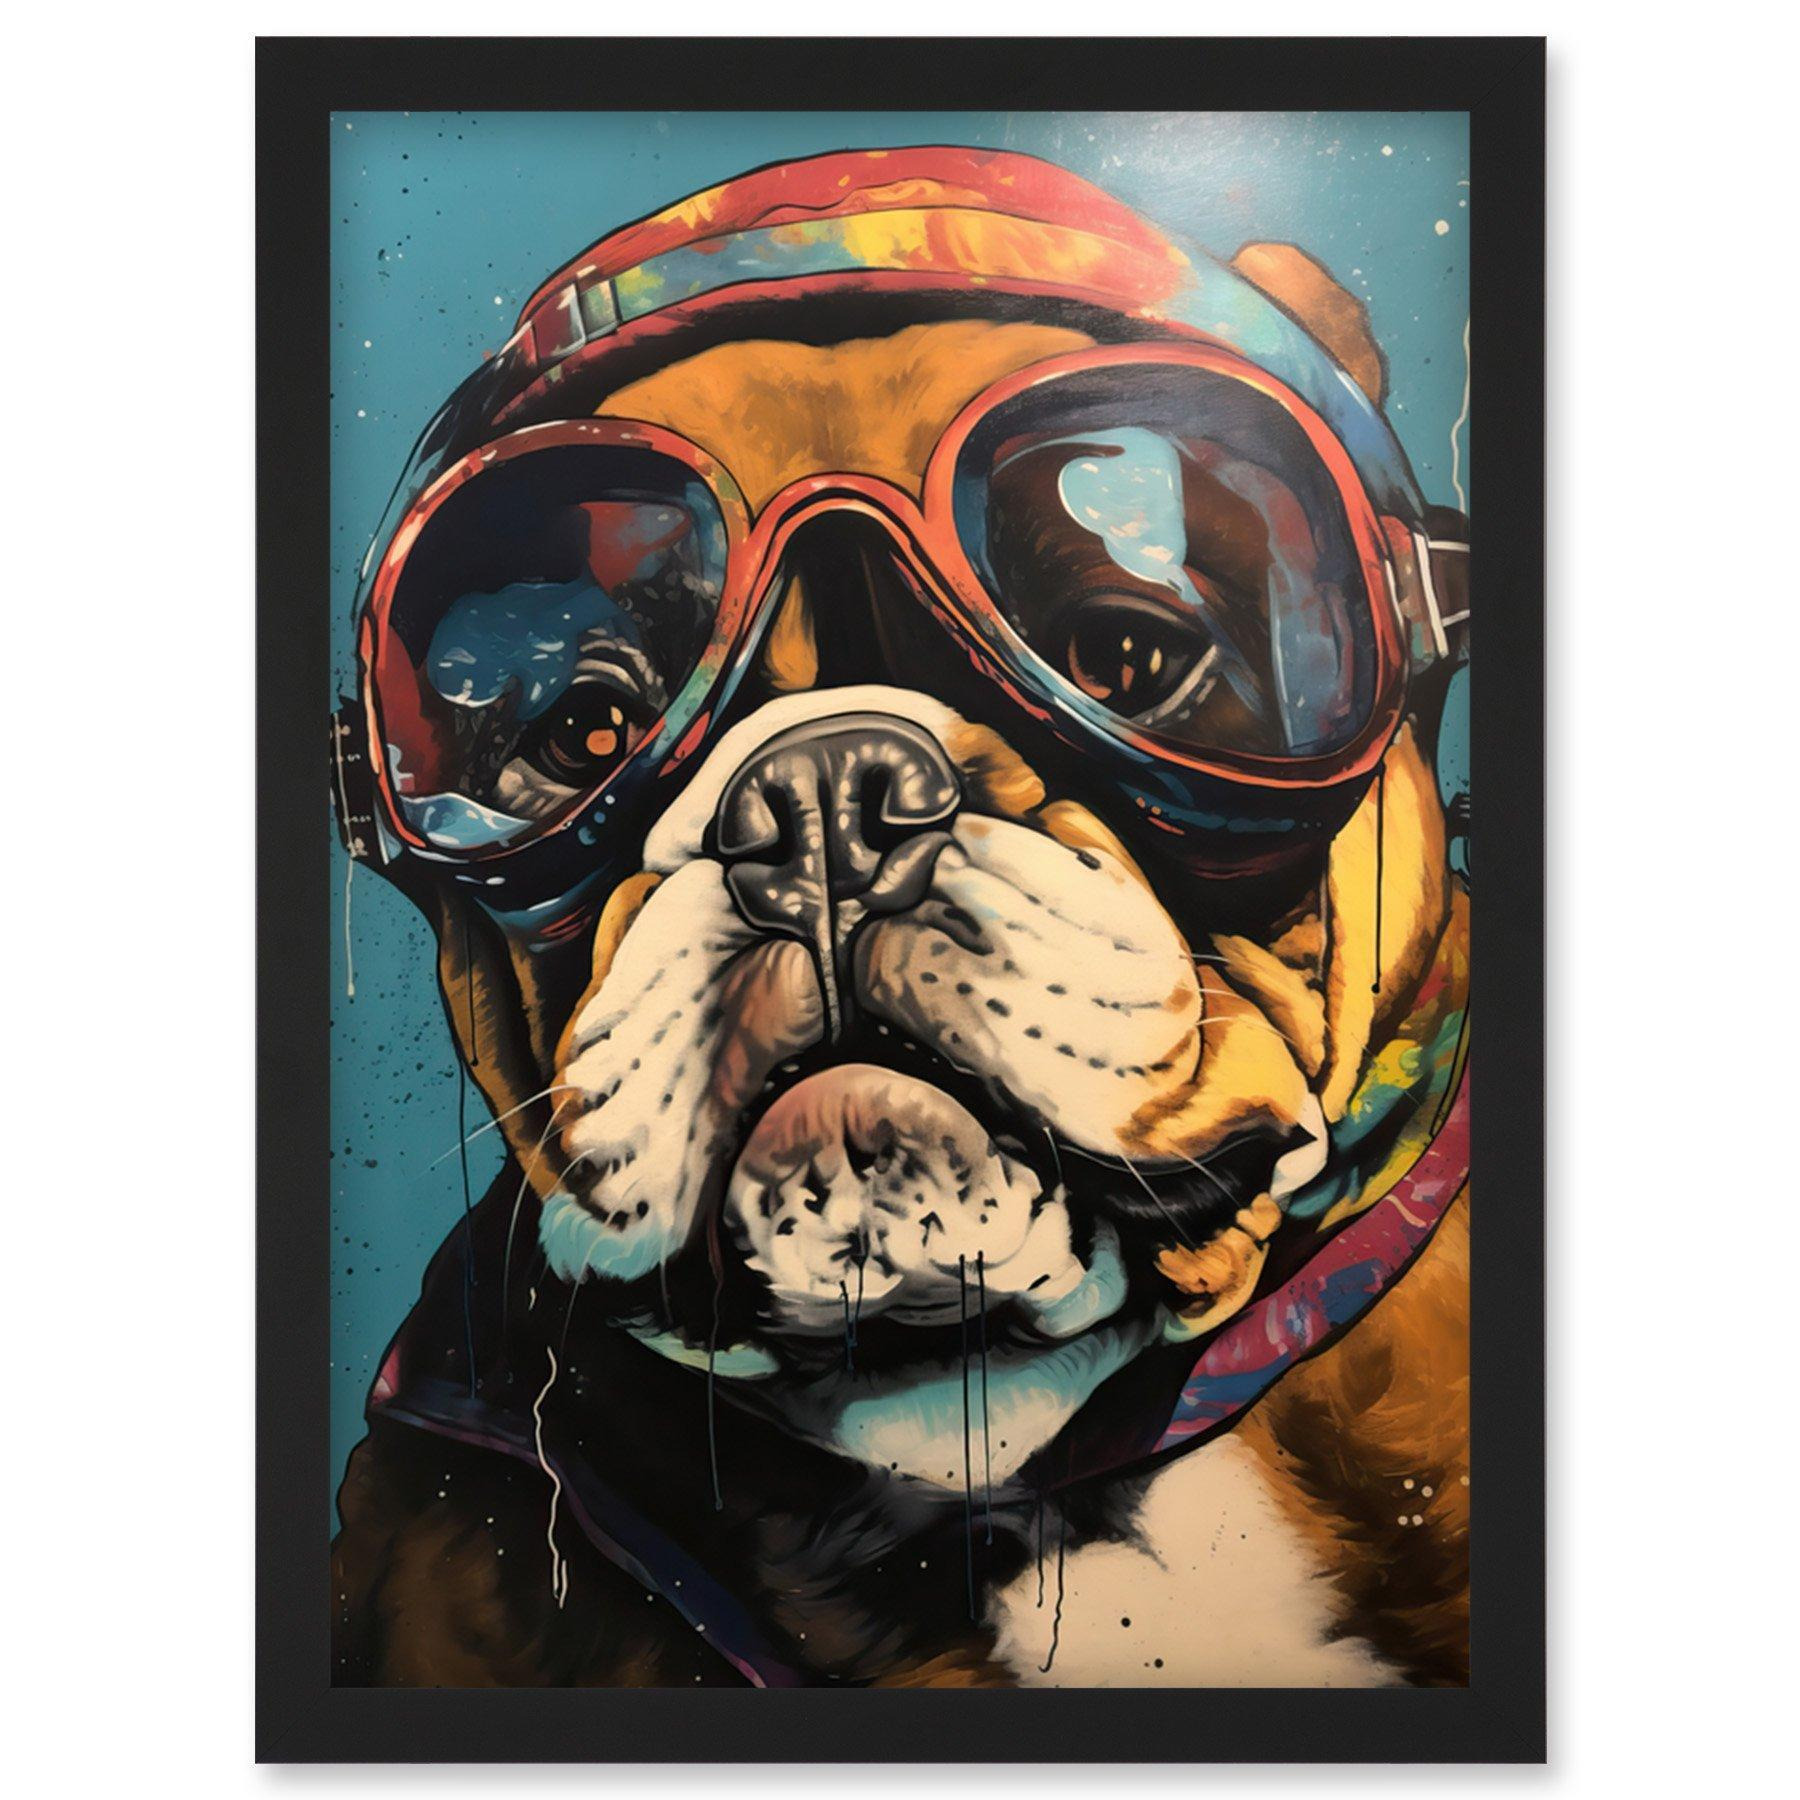 Bulldog with Retro Motorcycle Goggles and Helmet Artwork Framed Wall Art Print A4 - image 1